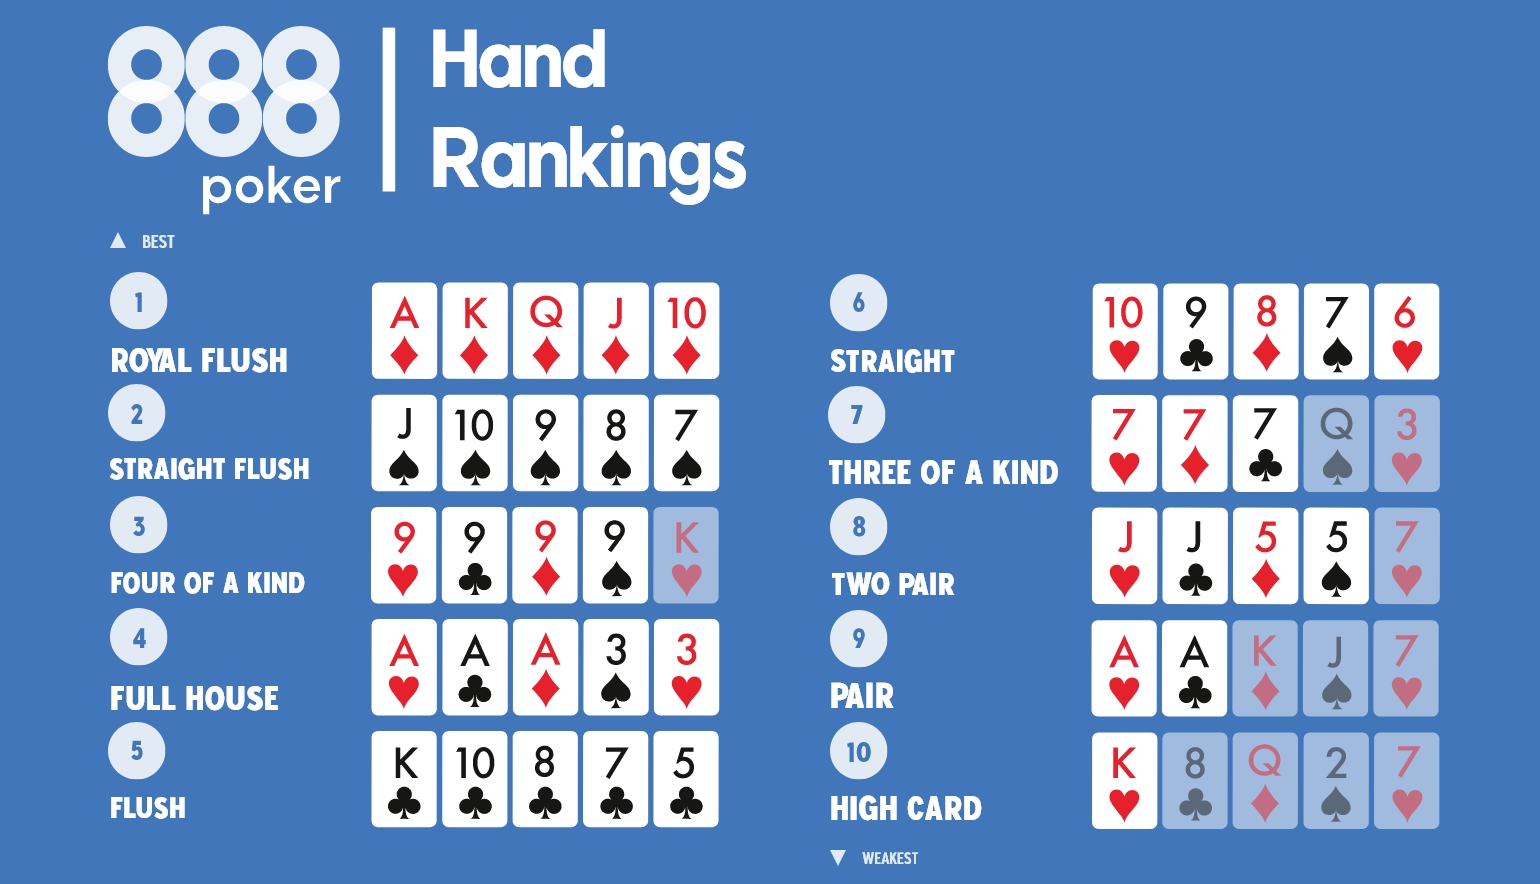 How is the ranking of hands determined?